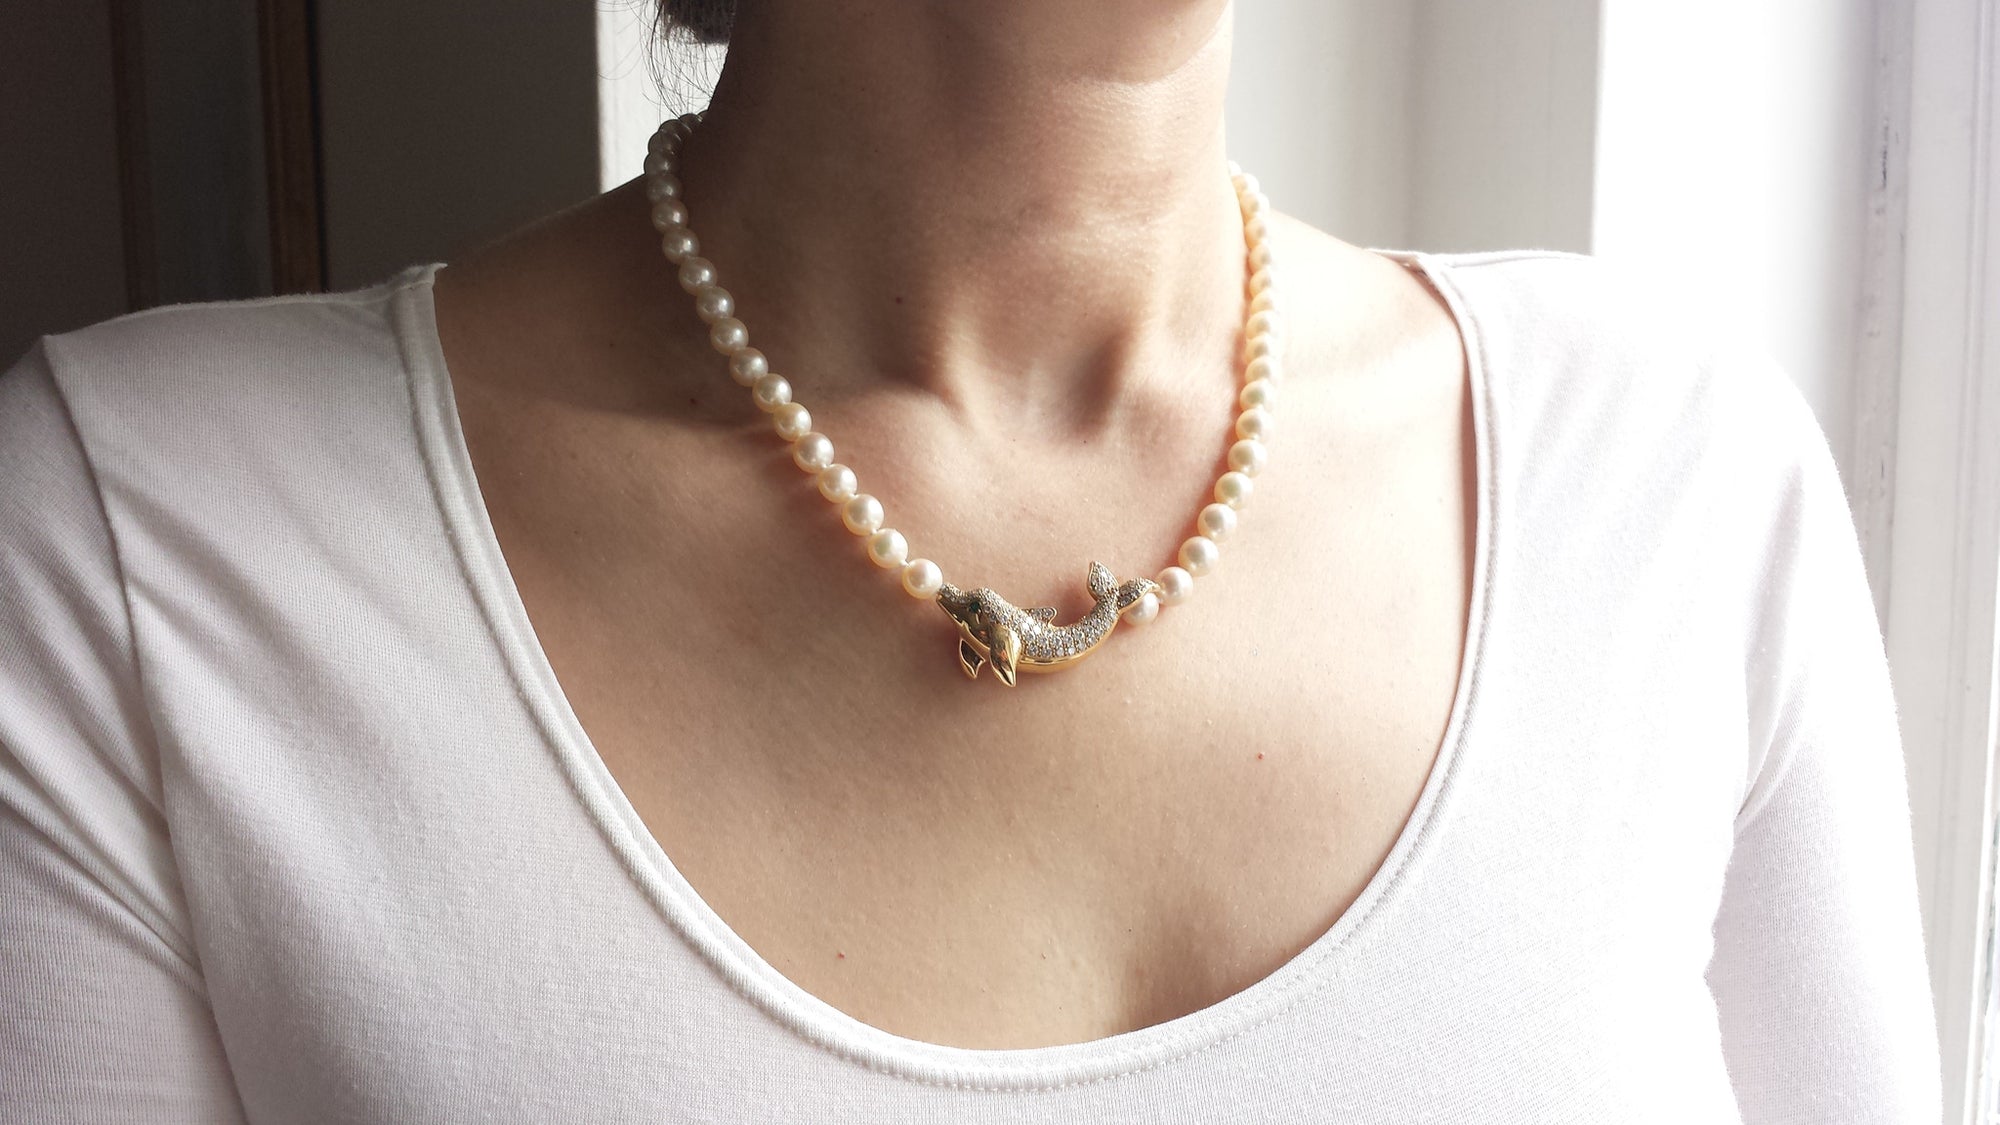 Cartier Akoya Pearl Dolphin Necklace in 18K Gold set with Diamonds & Emerald